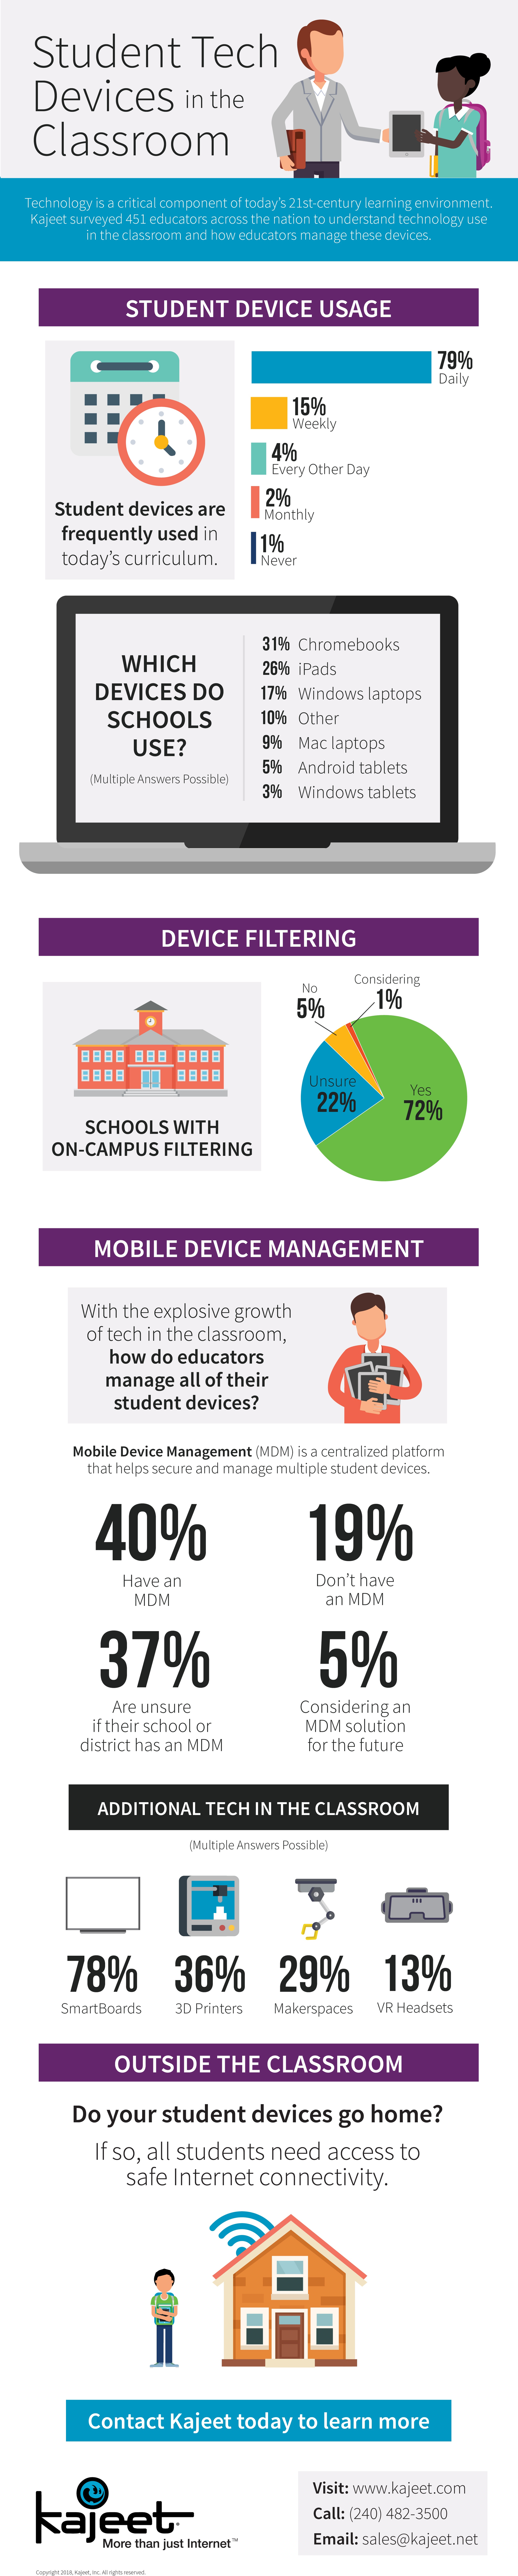 Student Tech Devices in the Classroom Infographic